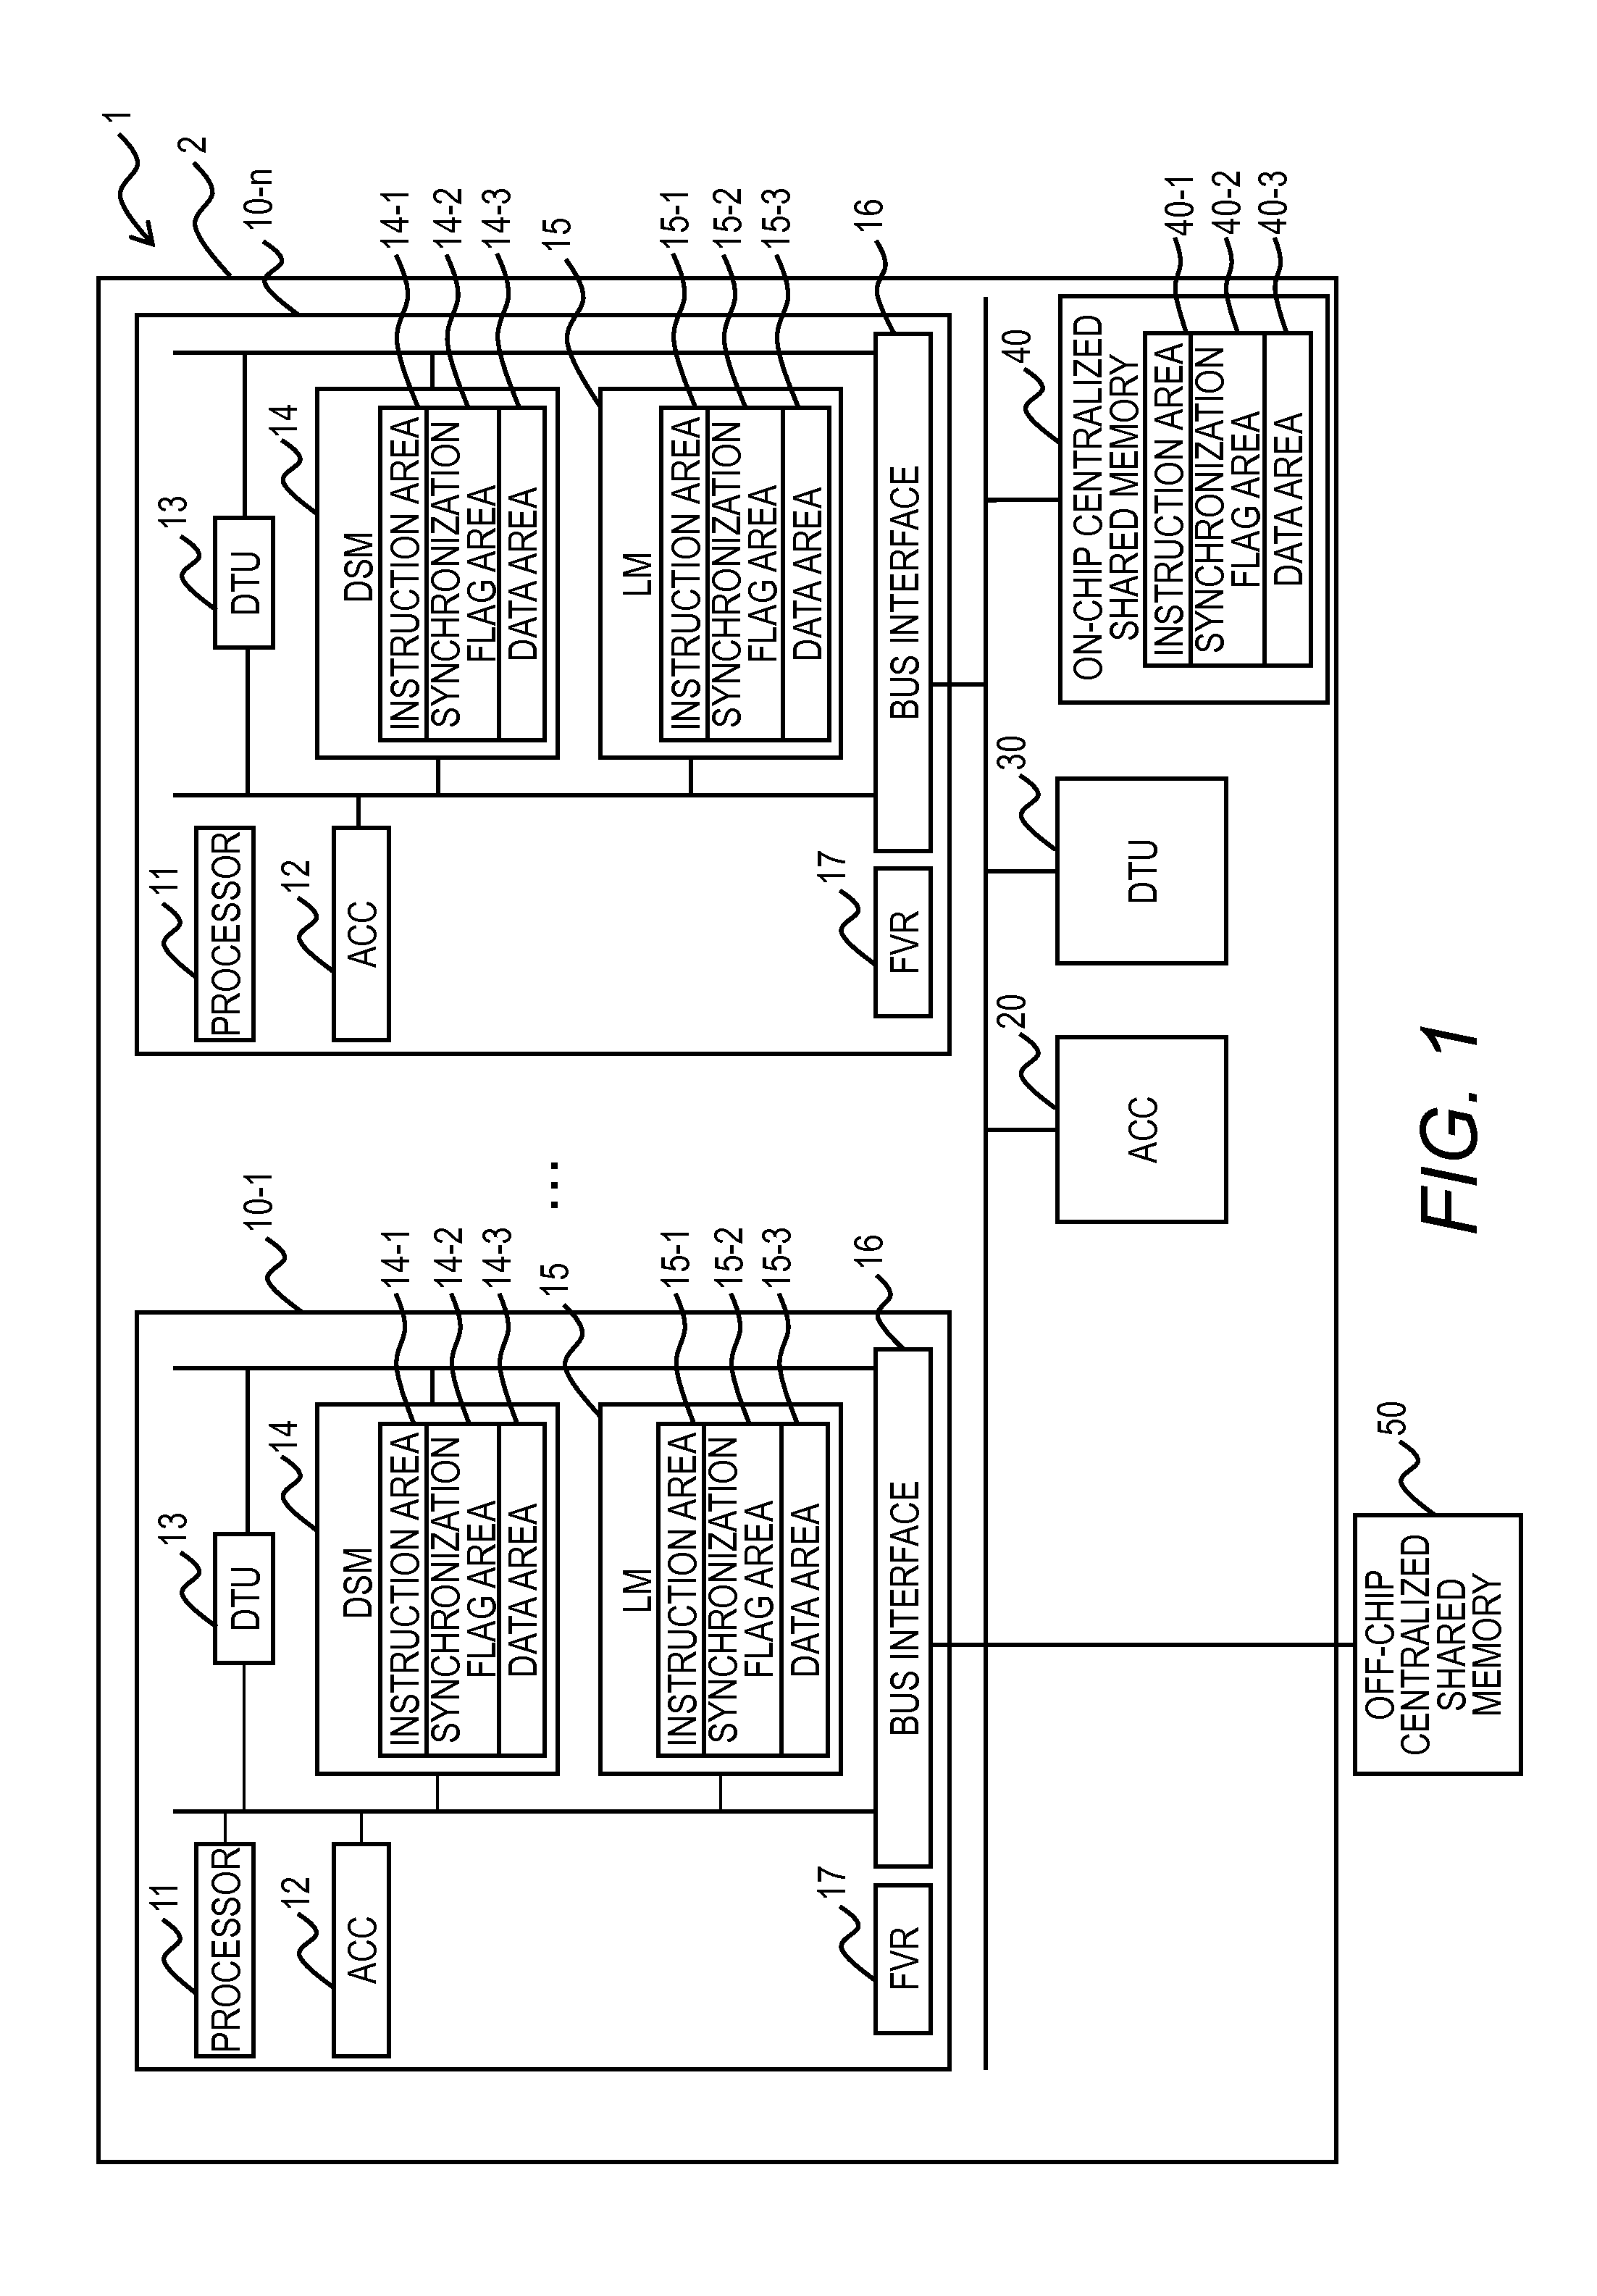 Processor system and accelerator